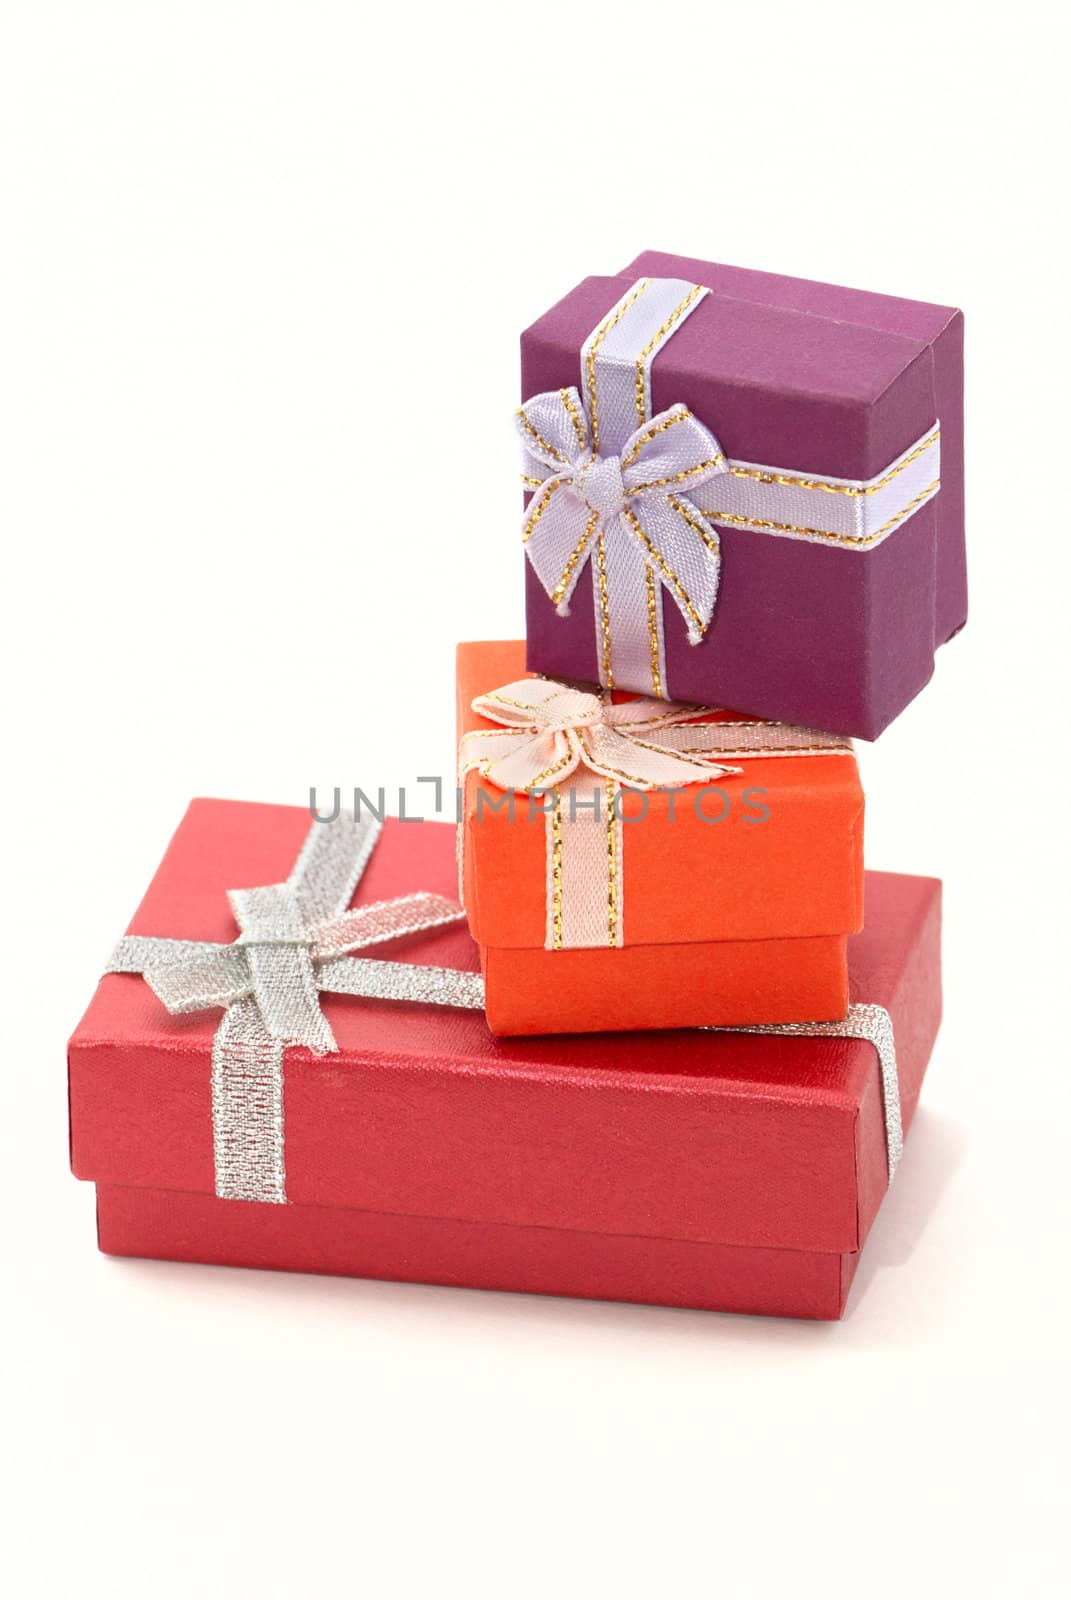 Three gift boxes one on another